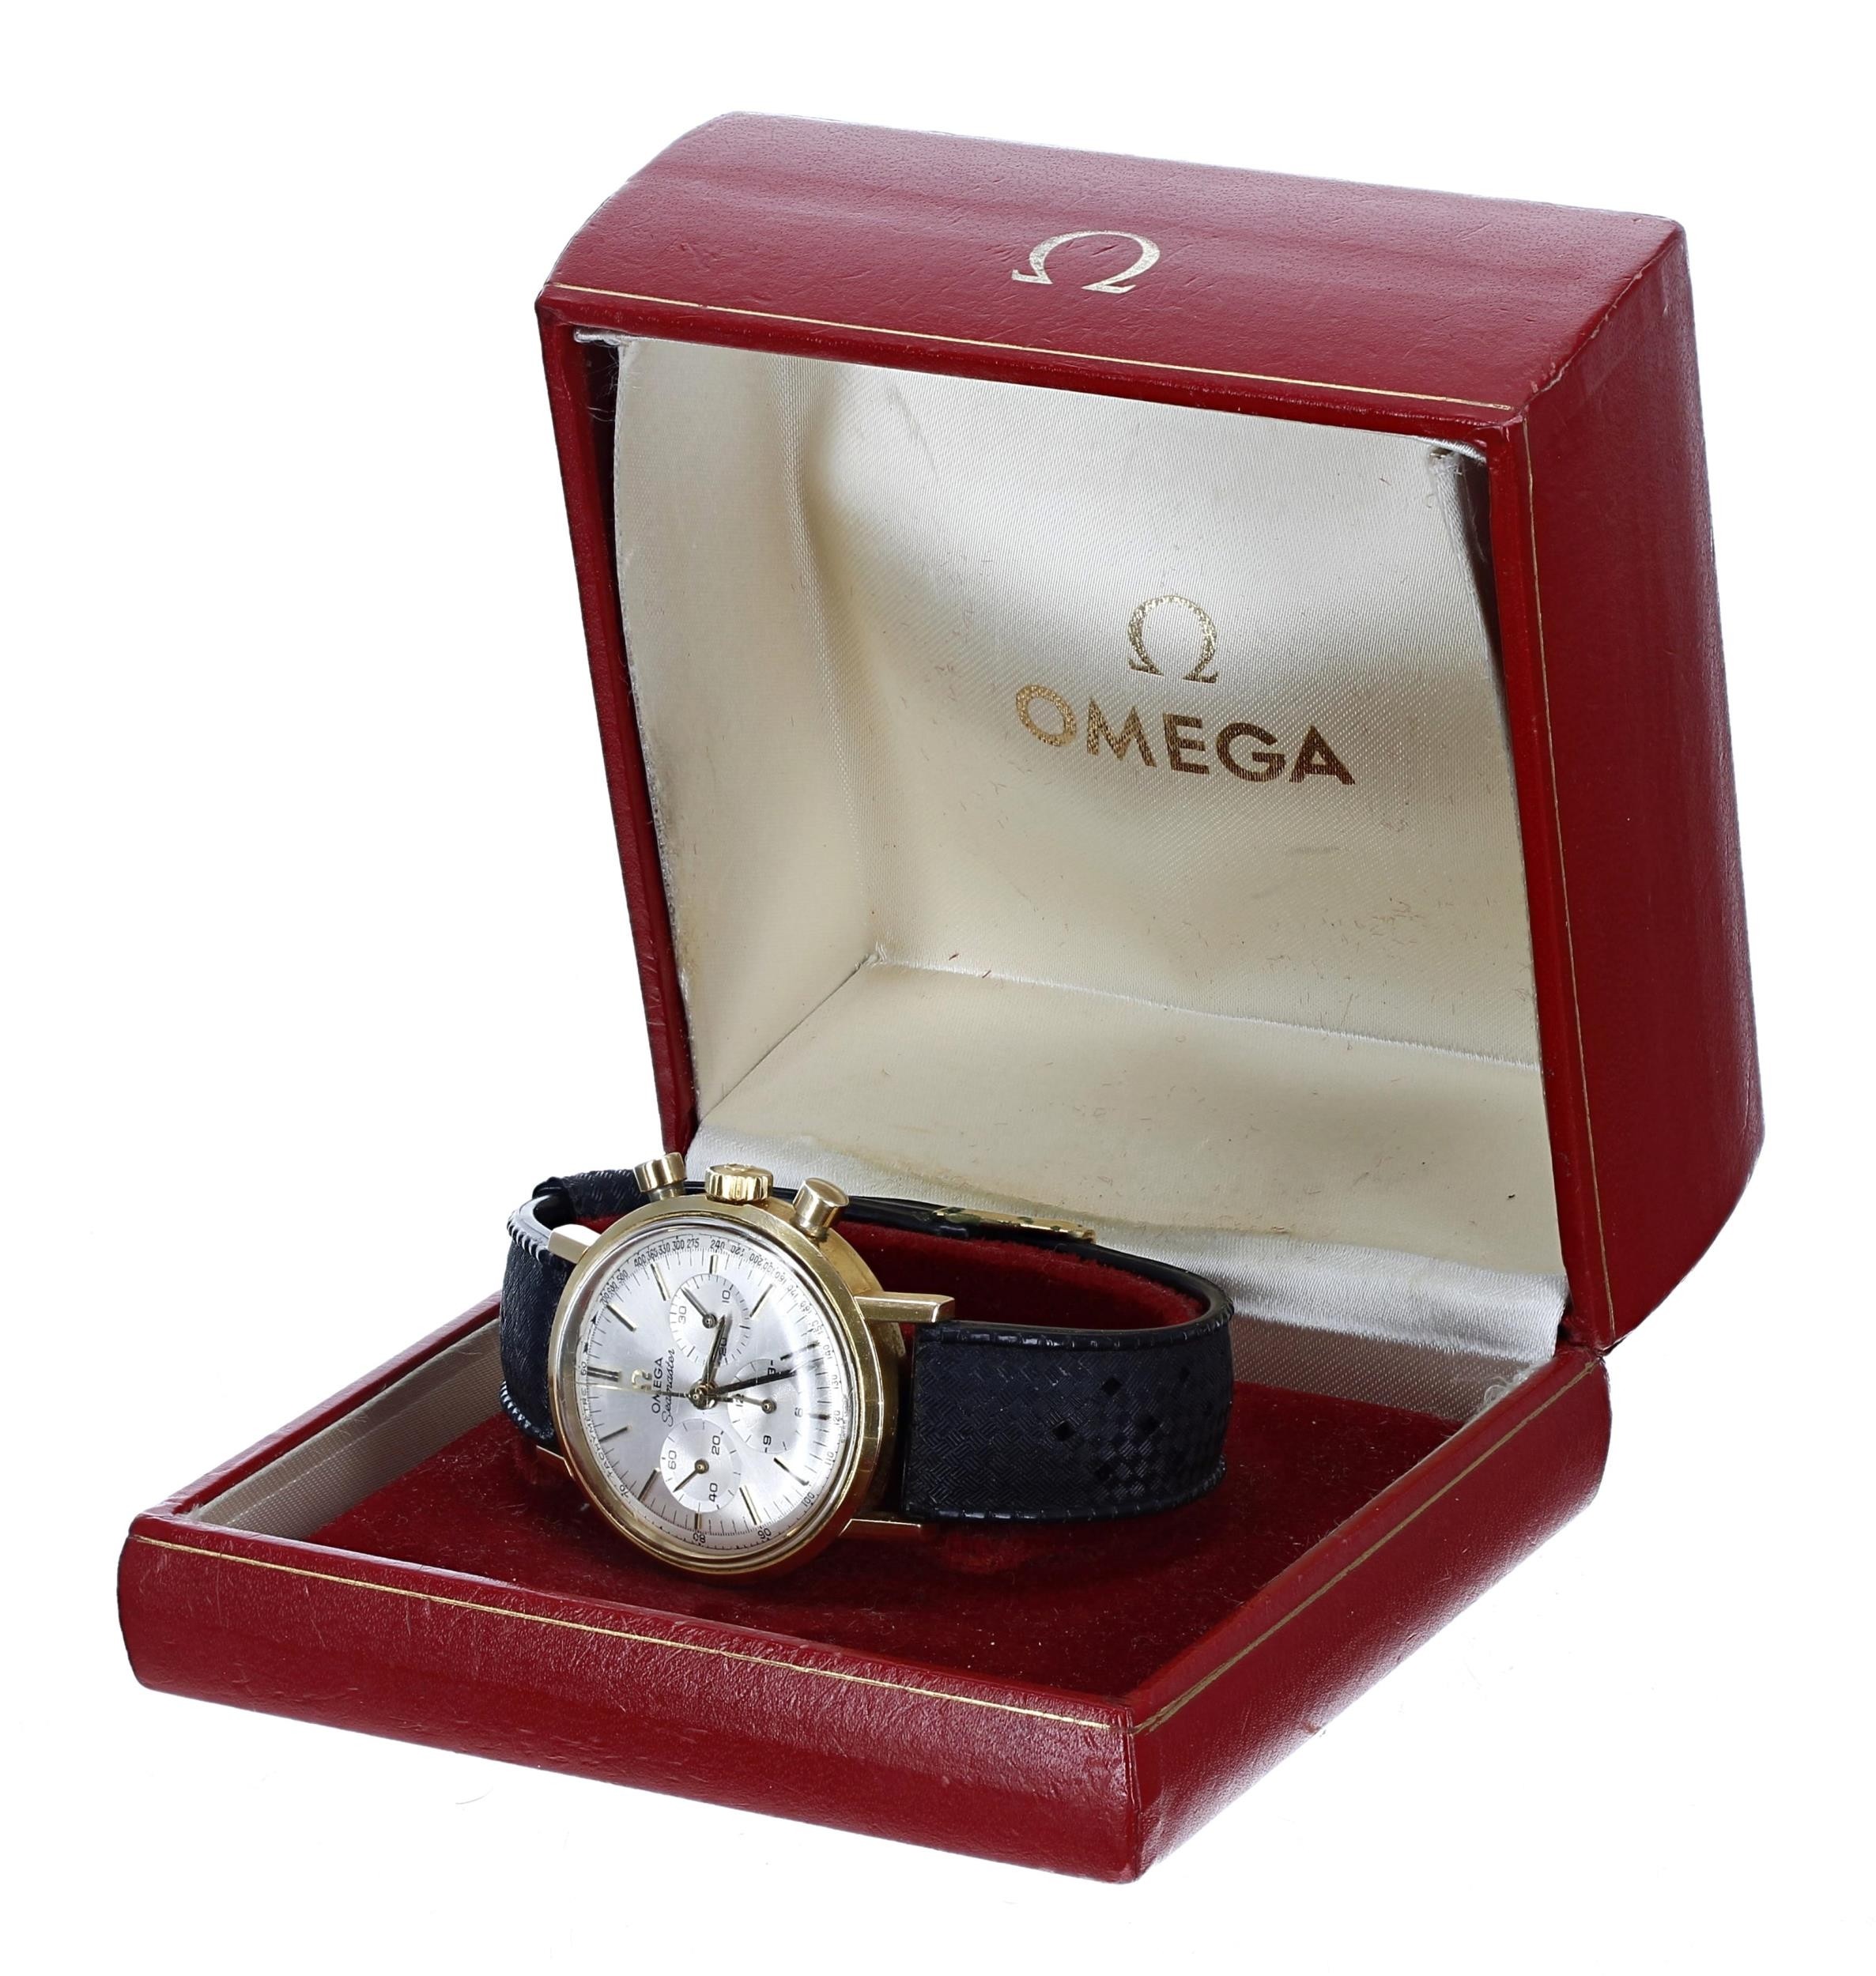 Omega Seamaster Chronograph gold plated and stainless steel gentleman's wristwatch, reference no. - Image 3 of 7